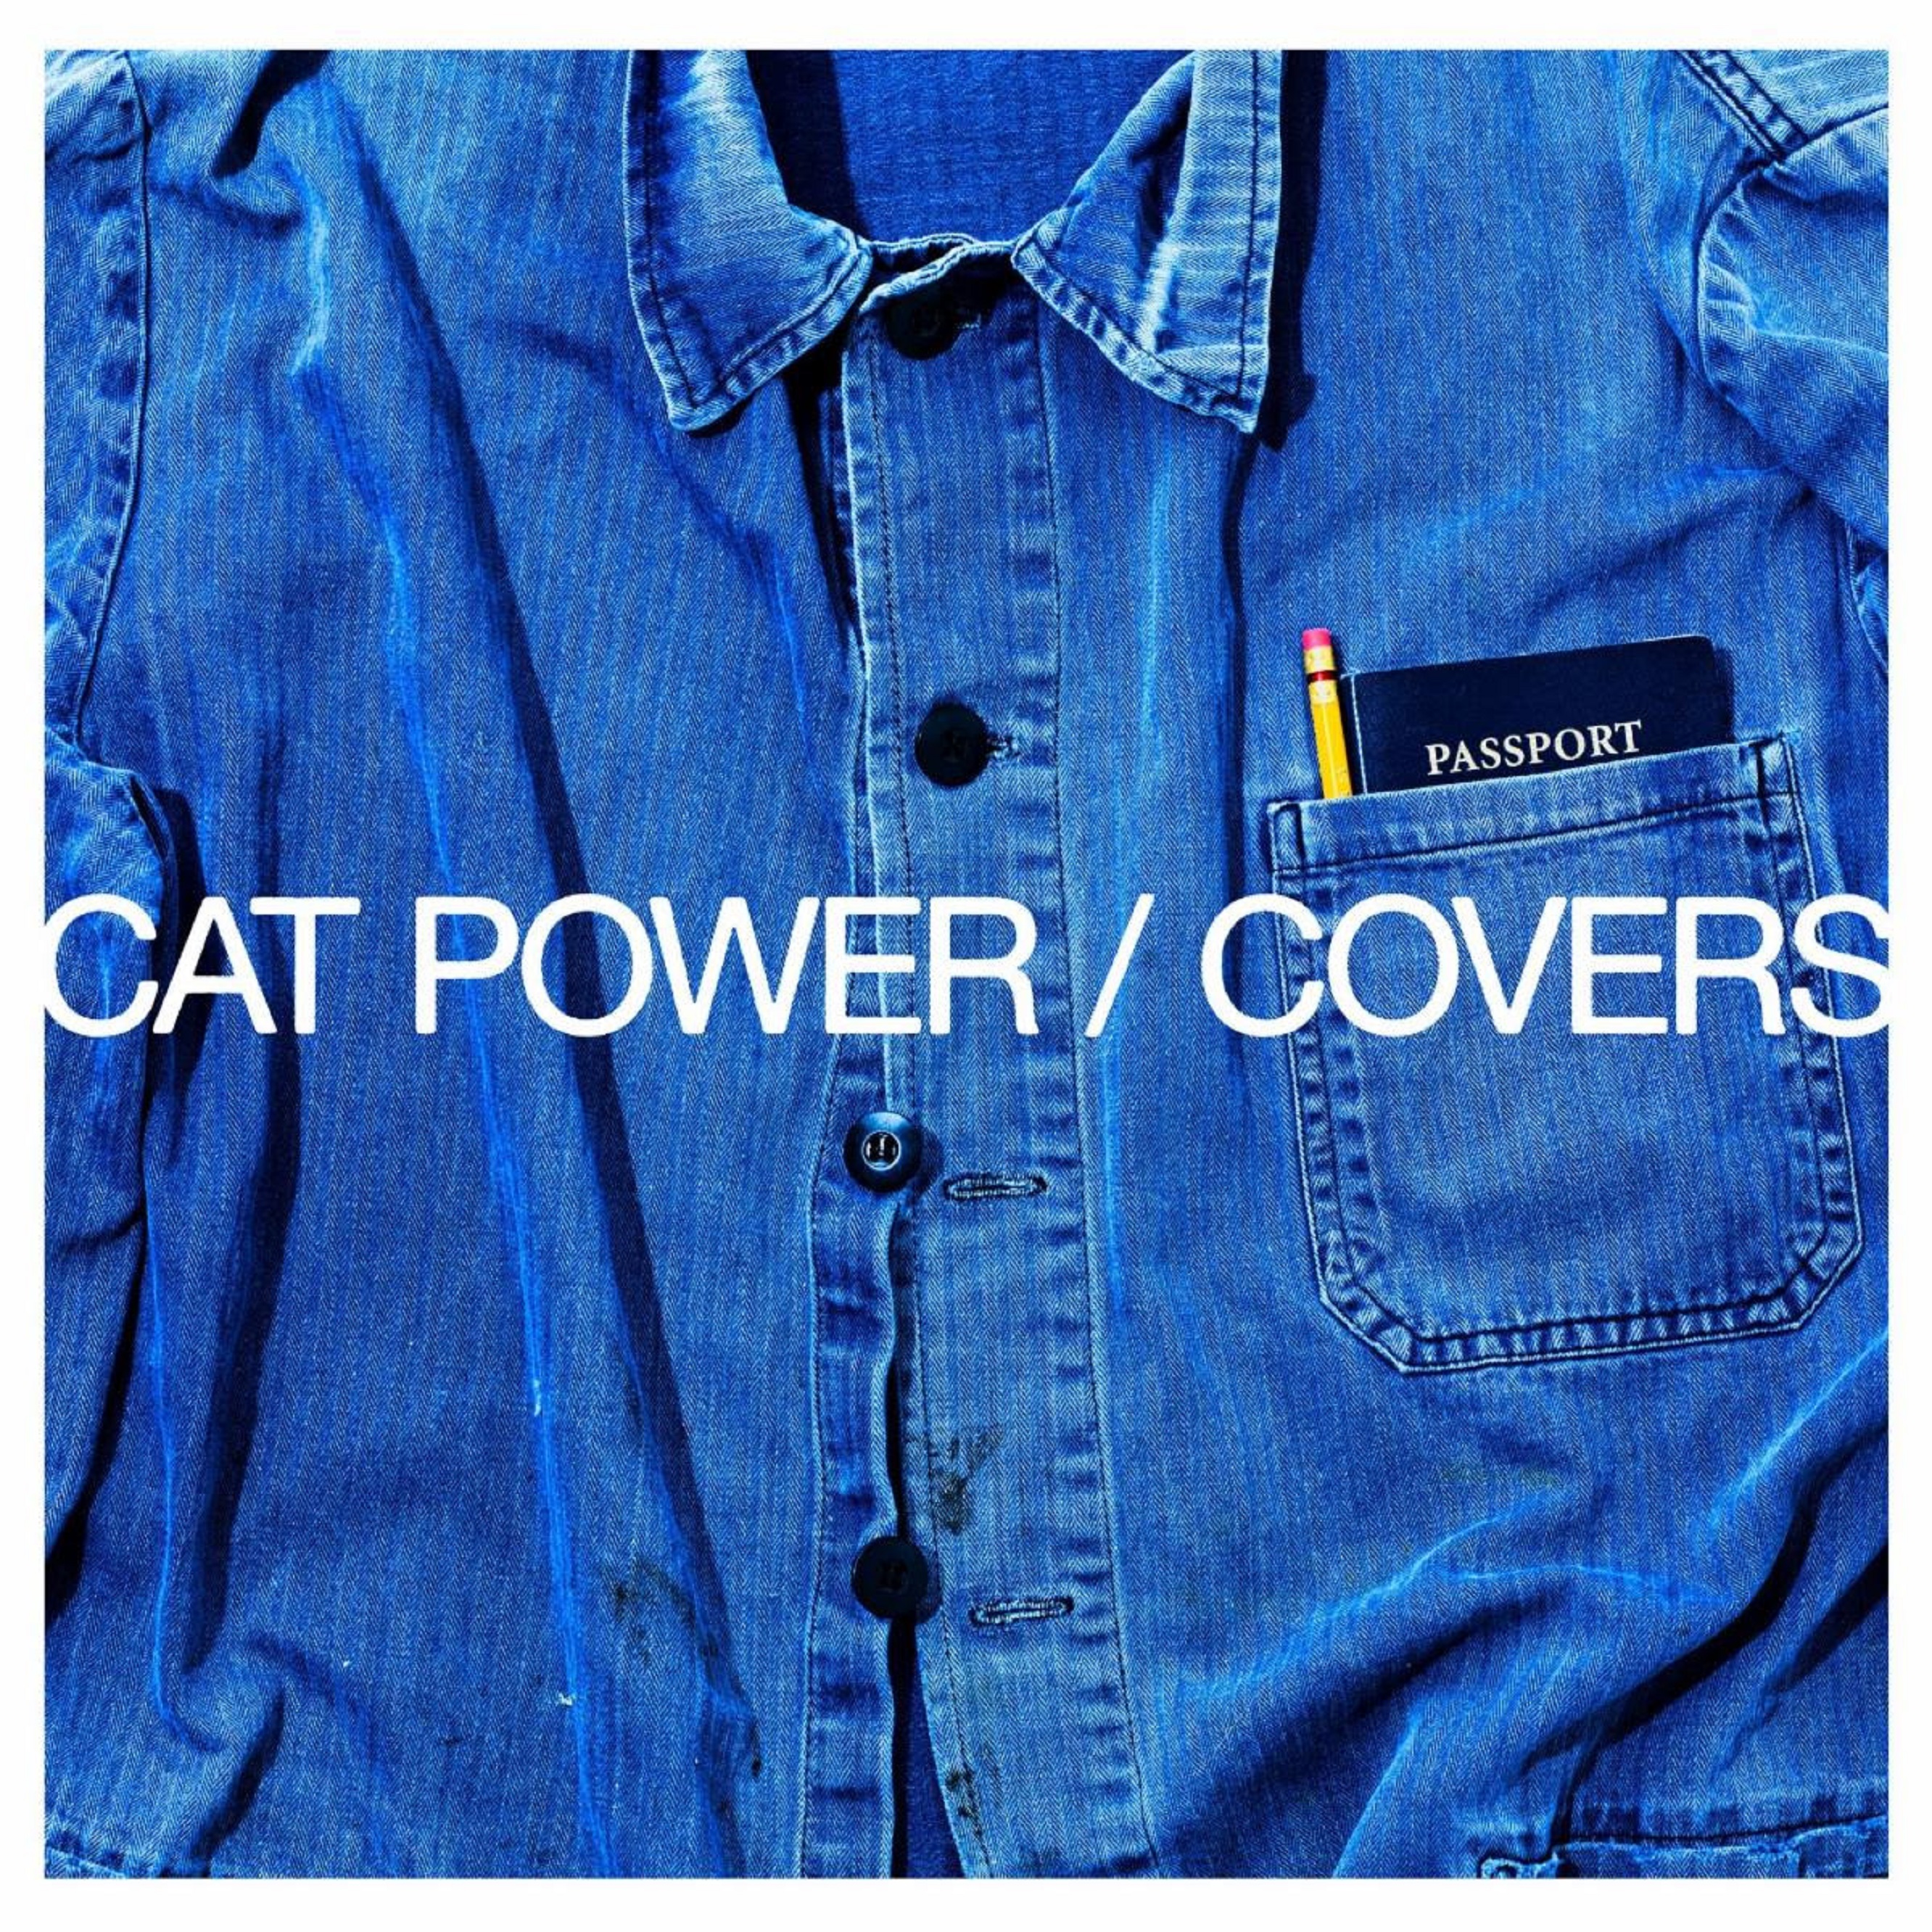 CAT POWER’S NEW ALBUM COVERS OUT NOW